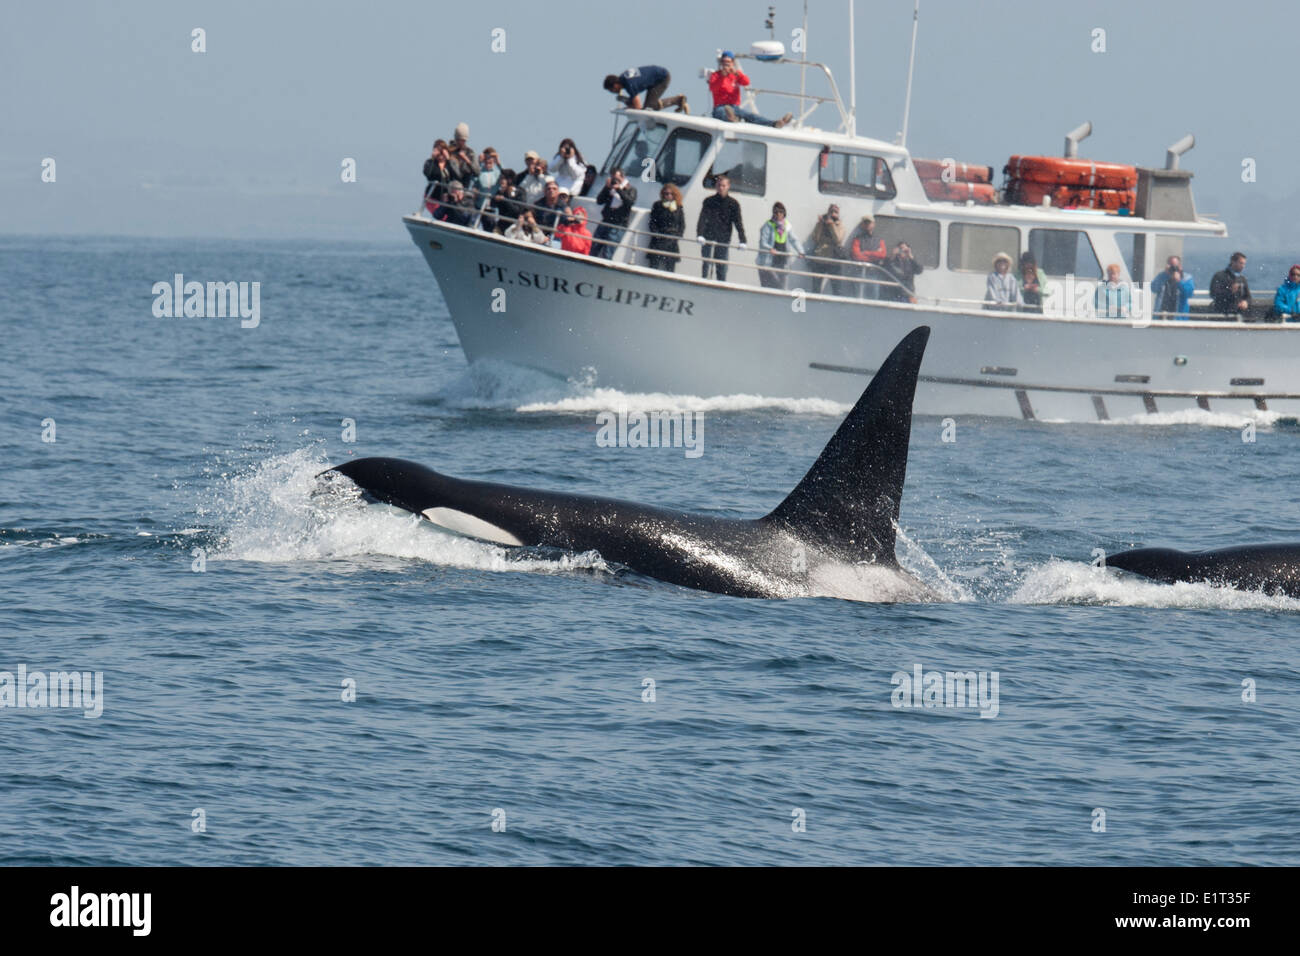 Transient/Biggs Killer Whale/Orca (Orcinus orca). Surfacing in front of Point Sur Clipper, Monterey, California, Pacific Ocean. Stock Photo